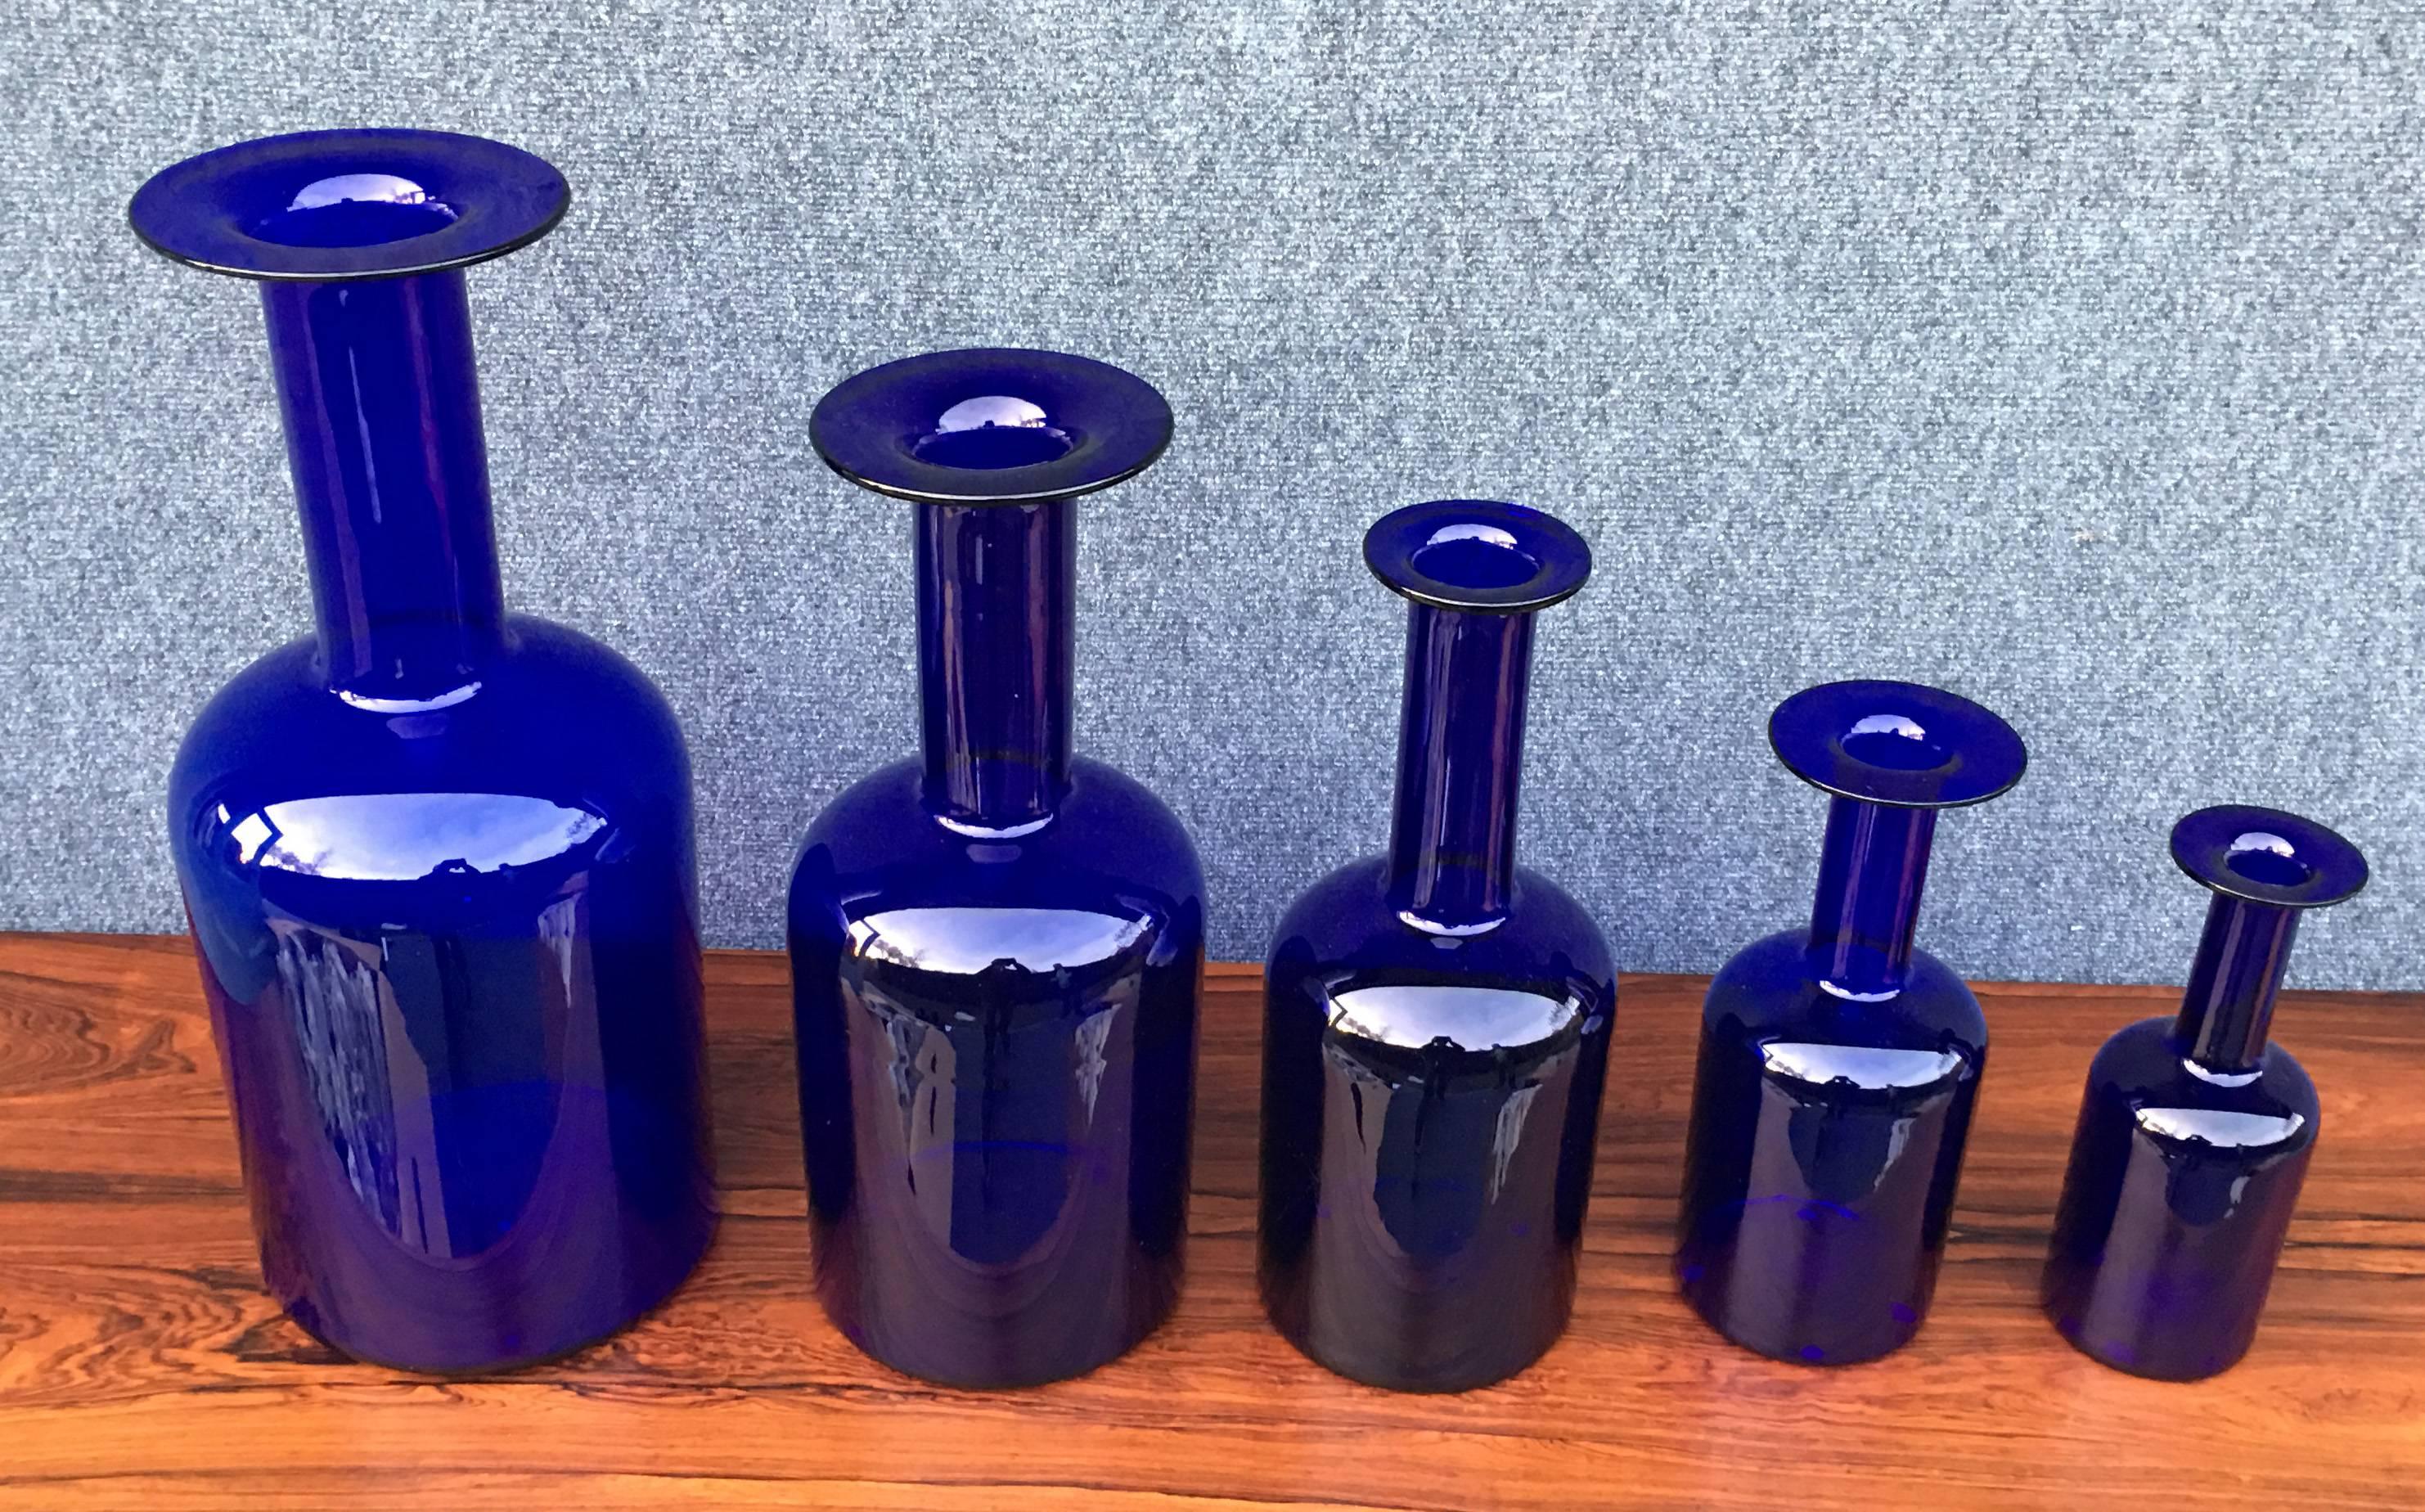 A perfect and original set of five graduated 'Gulvase' by Otto Brauer for Holmegaard in blue. Price is for the whole set.

The sizes from large to small are:
50 cm high x 20 cm diameter,
43 cm high x 17cm diameter,
38 cm high x 14.5 cm